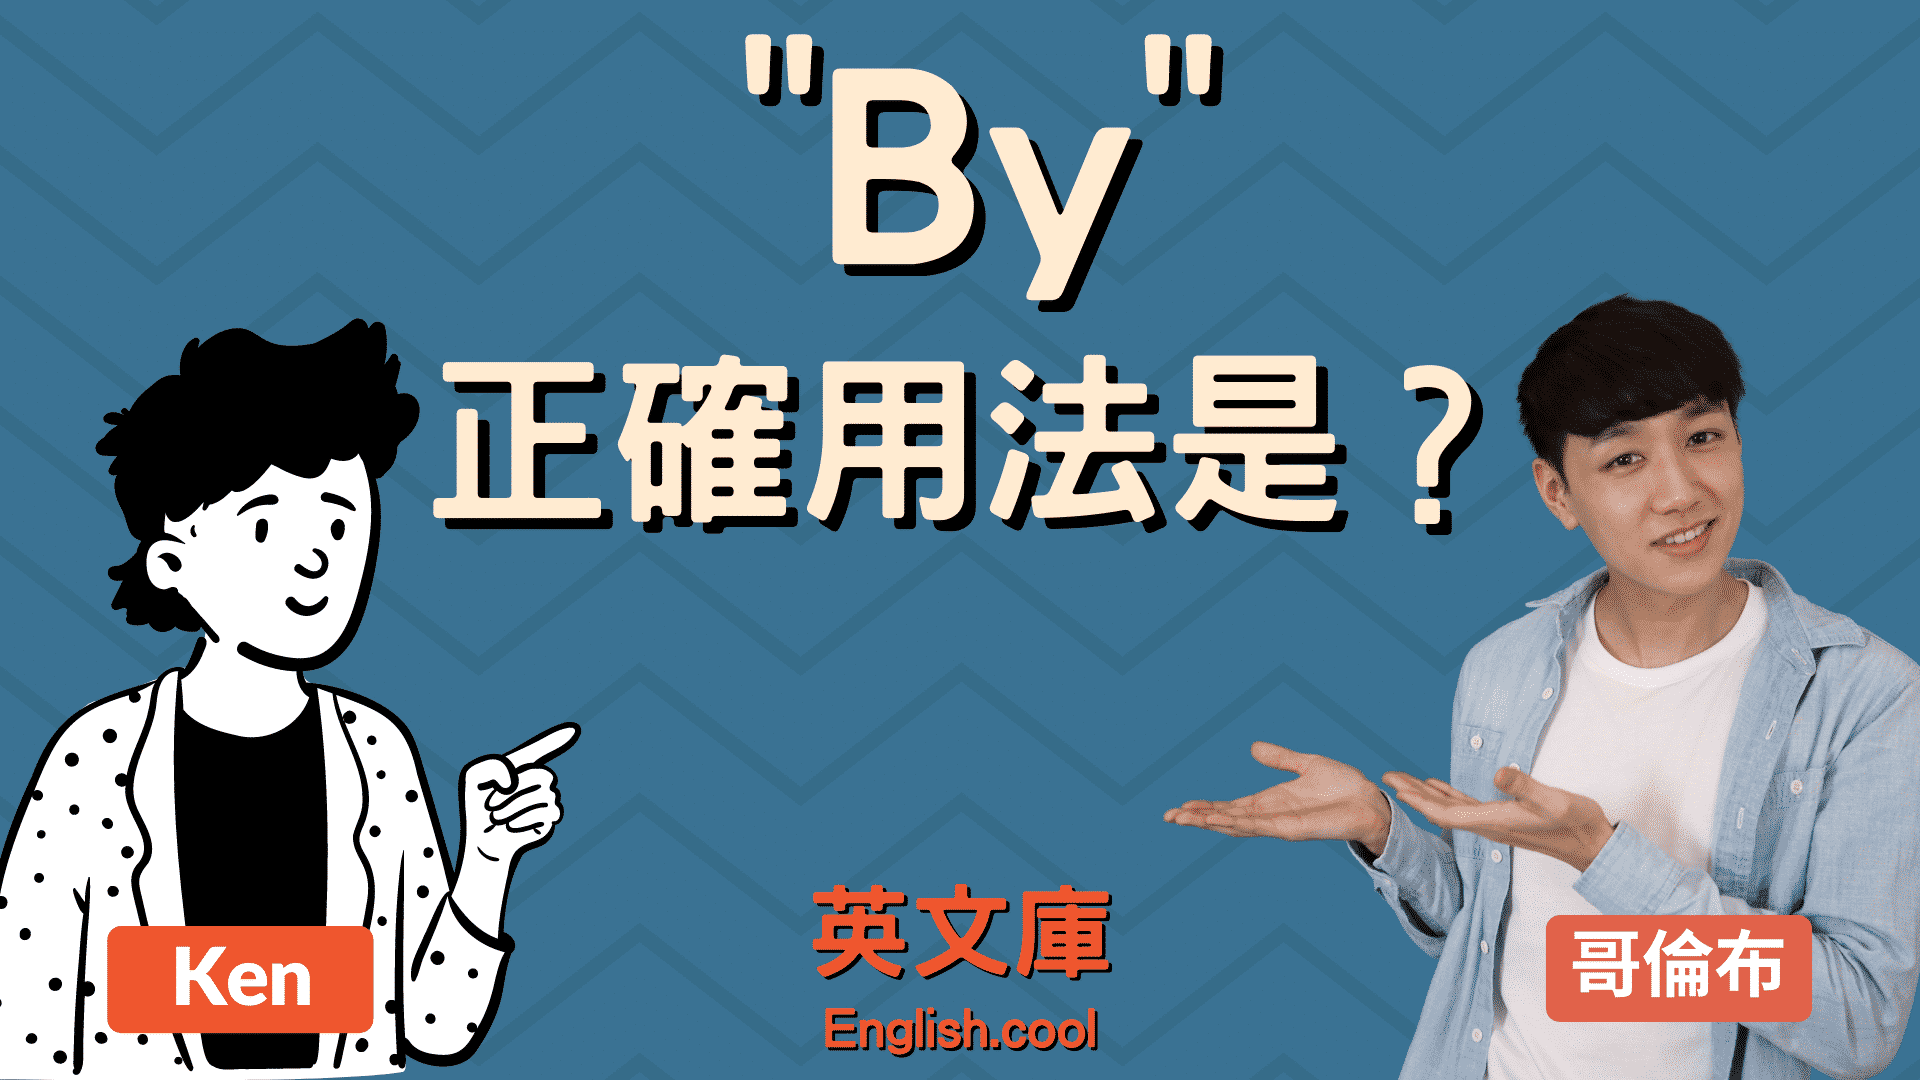 You are currently viewing 「by」正確用法是？來看例句搞懂各種用法！